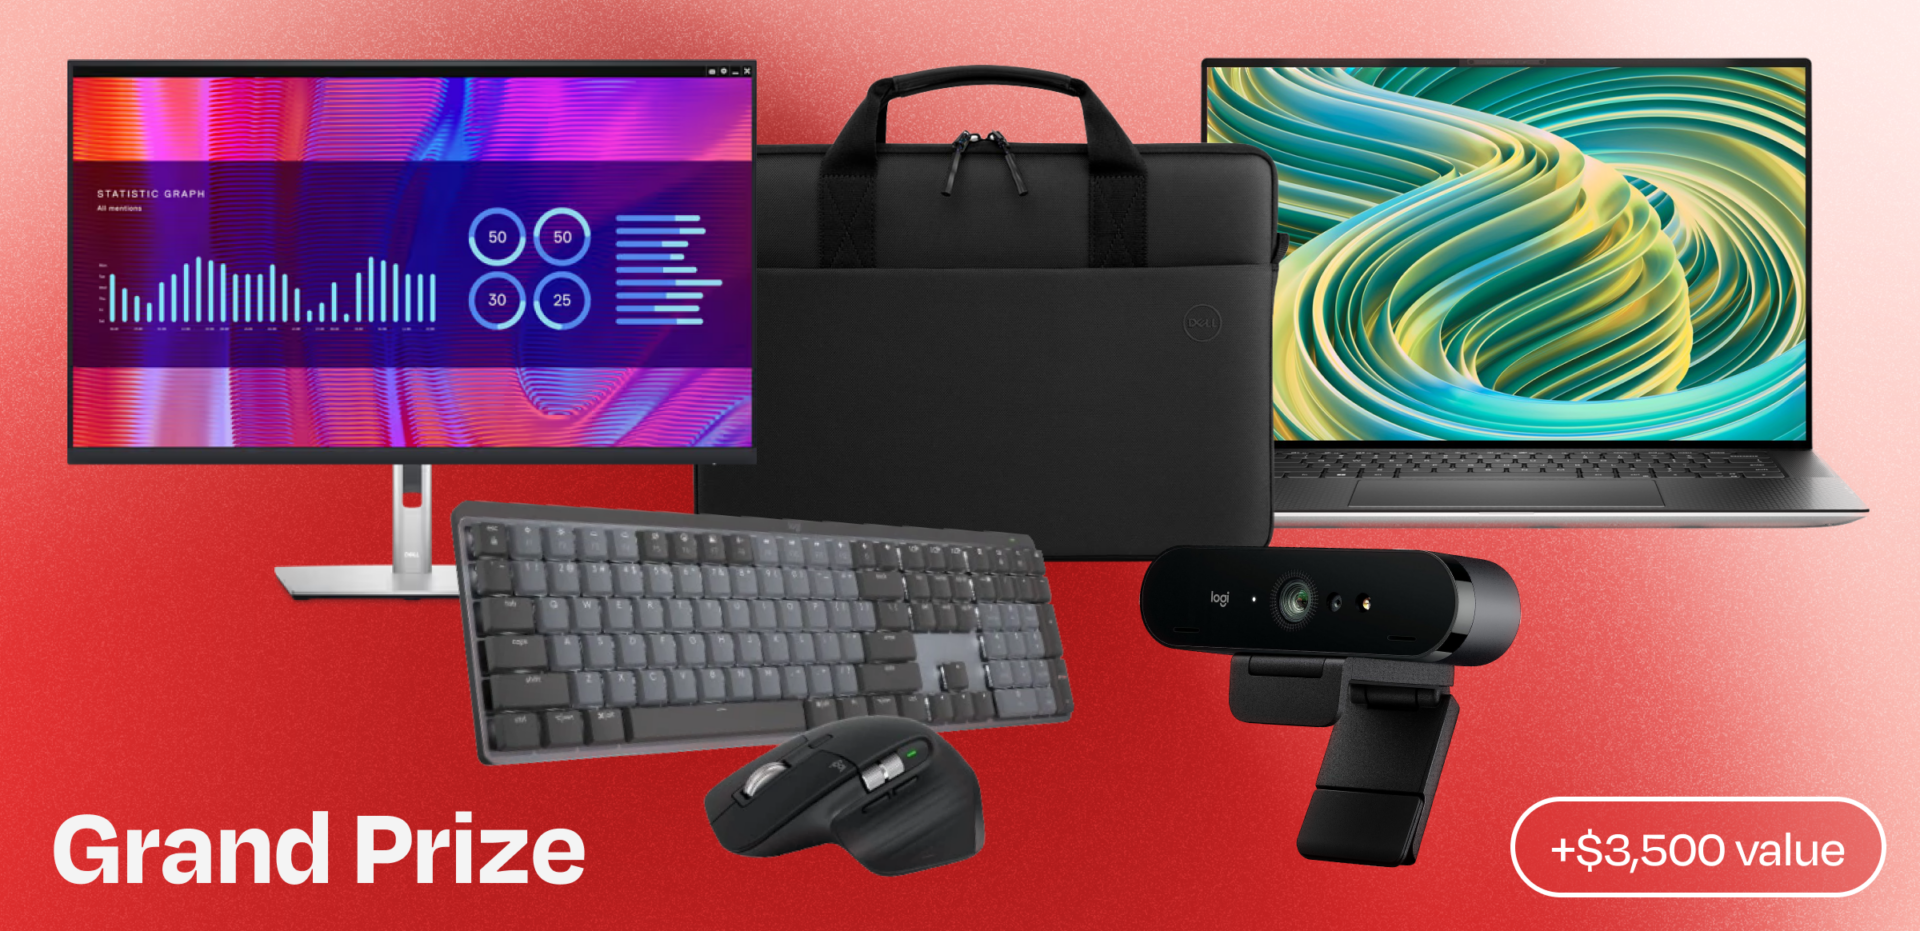 Grand Prize includes, Dell XPS 15 laptop, Dell 32USB-C Hub Monitor, Logitech MX wireless keyboard and wireless mouse, Logitech Brio 4K Webcam, and Dell EcoLaptop Pro Sleeve